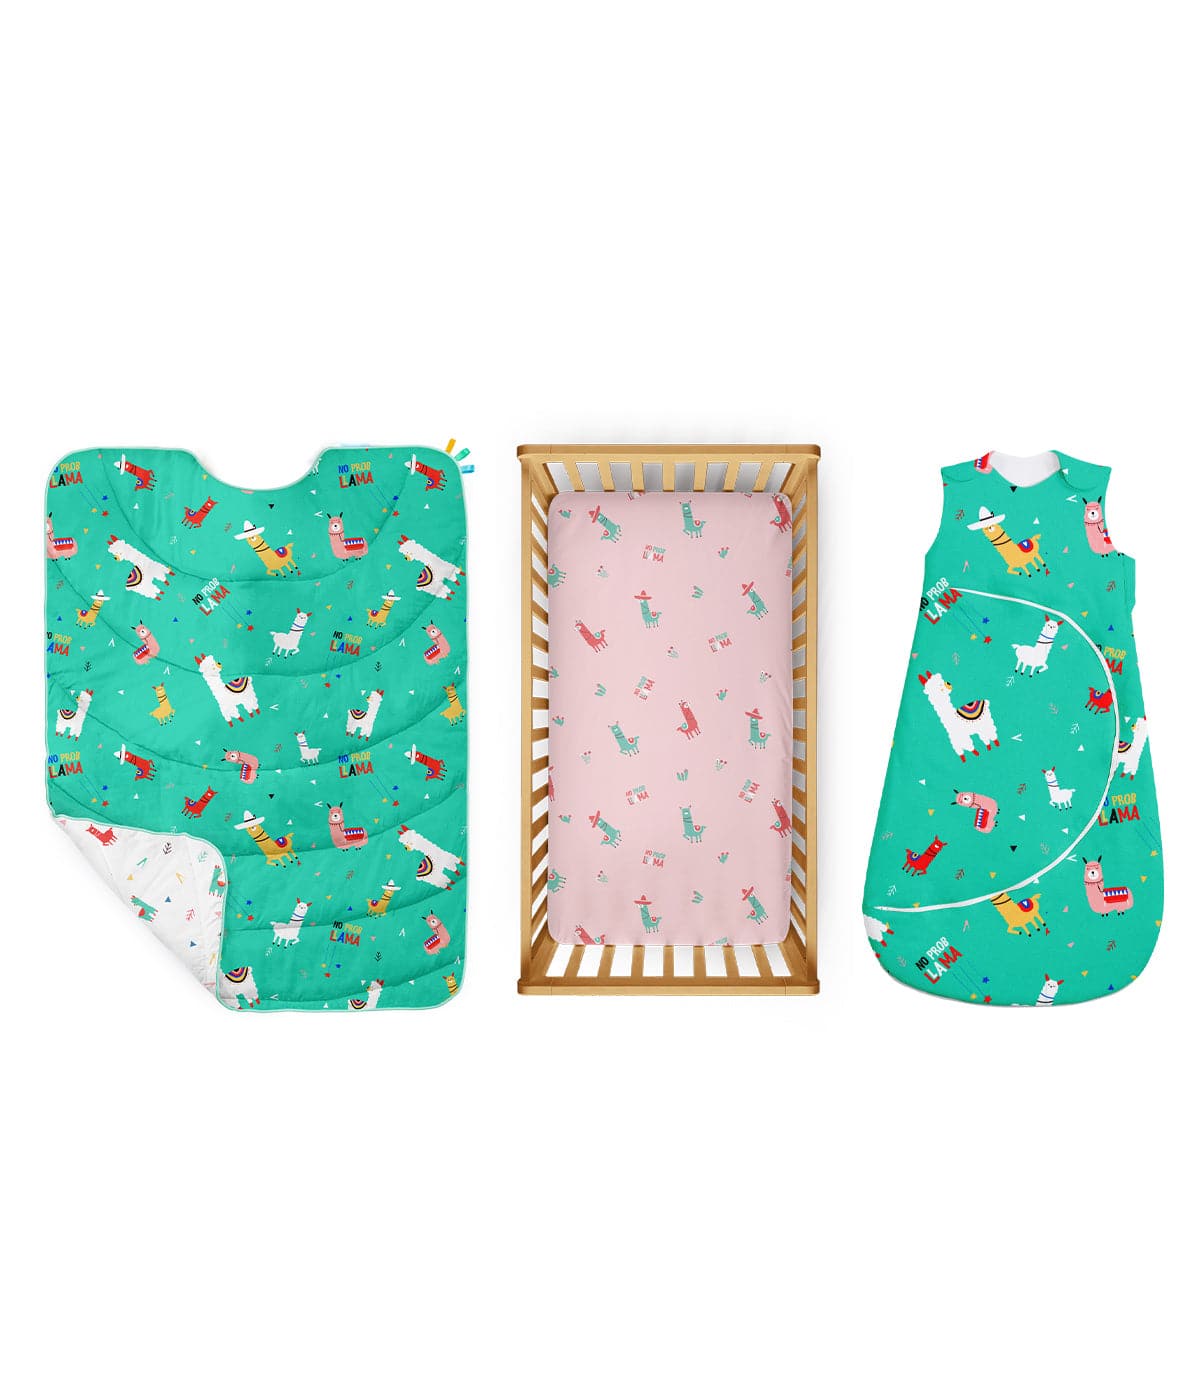 Baby's first bedding set (1 Quilt + 1 Fitted Crib sheet + 1 Sleeping Bag)